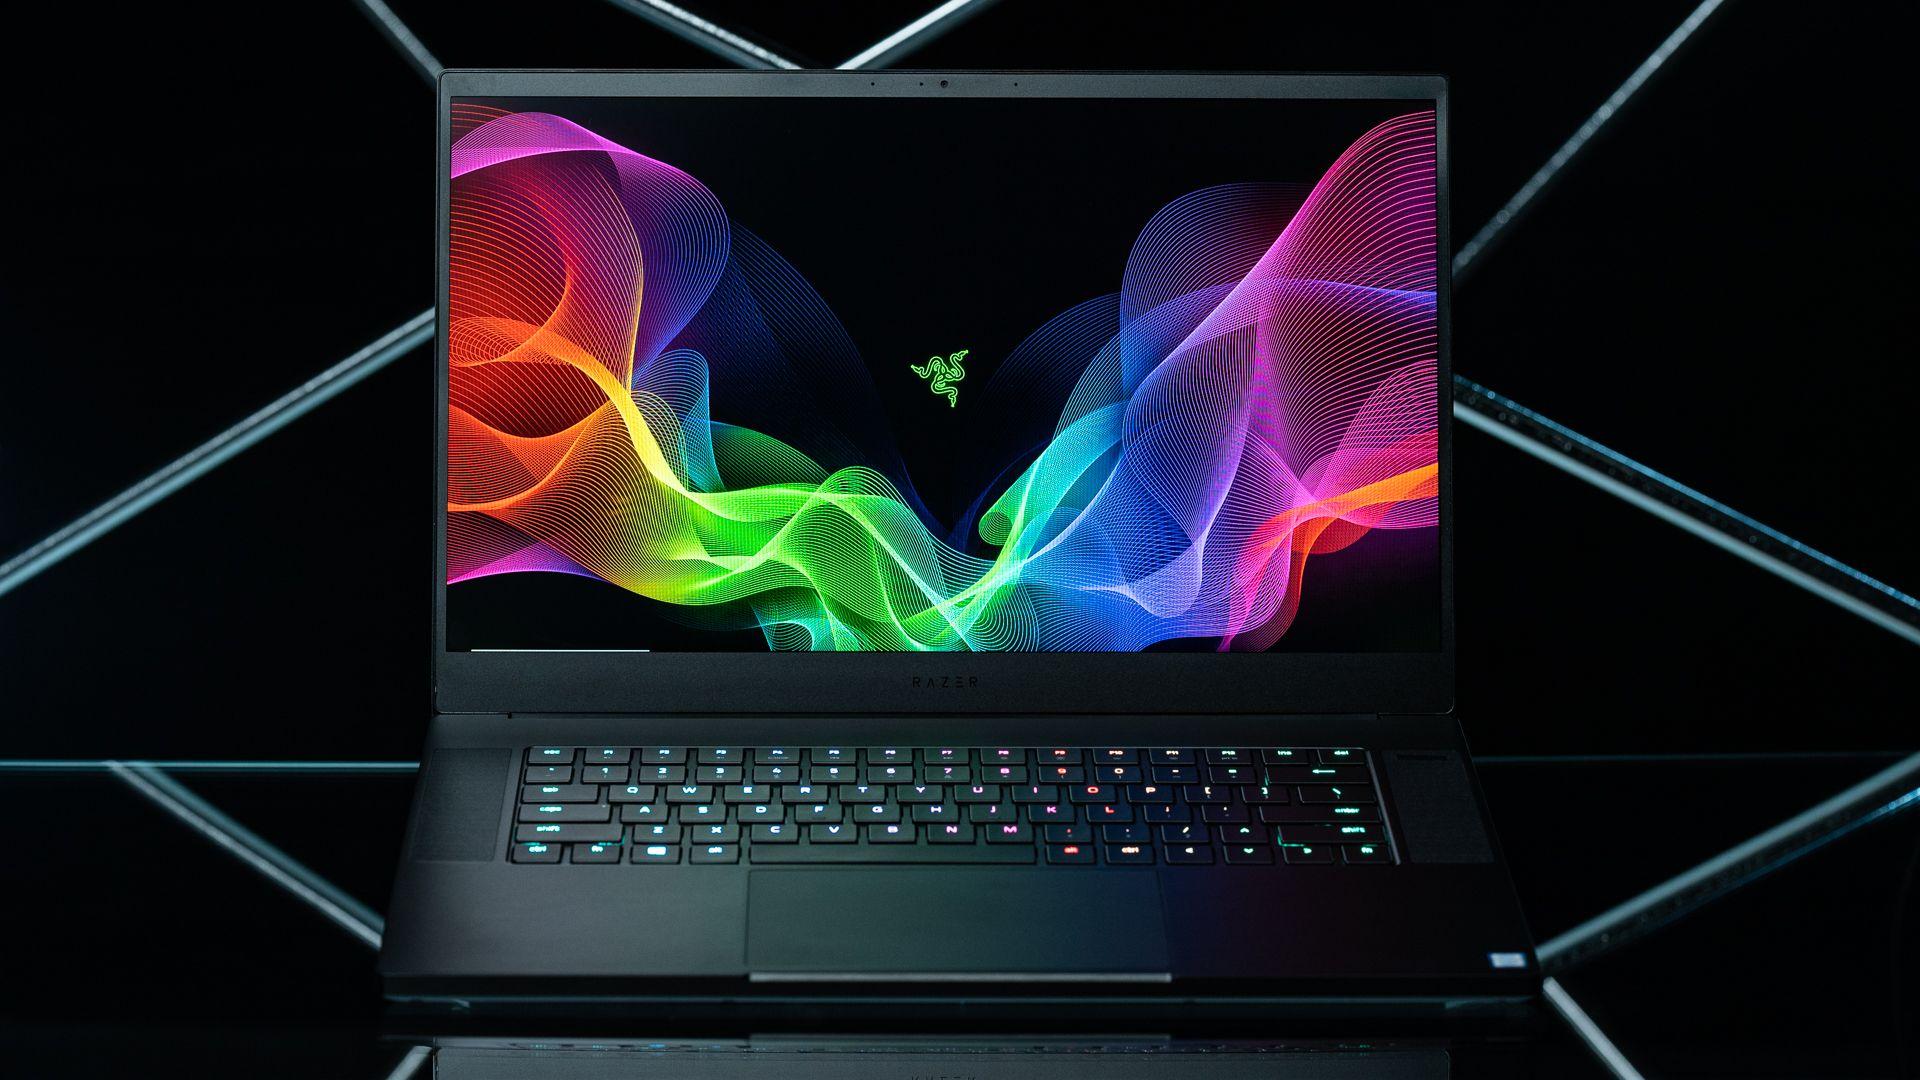 Hands On: The Razer Blade 15 Advanced Fuses Power And Design